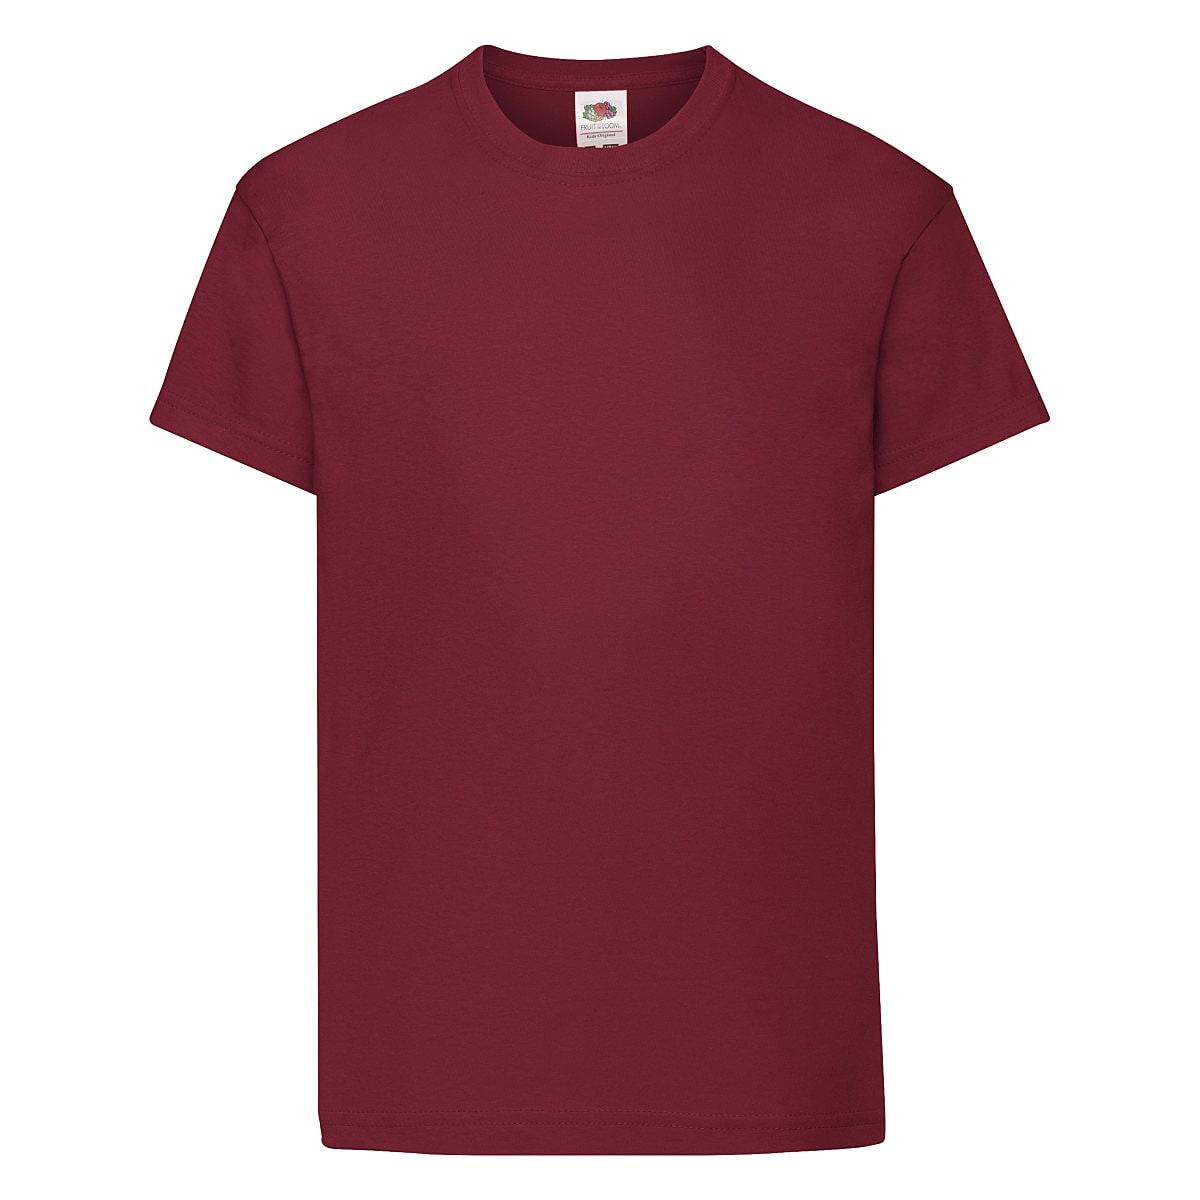 Fruit Of The Loom Kids Original T-Shirt in Brick Red (Product Code: 61019)